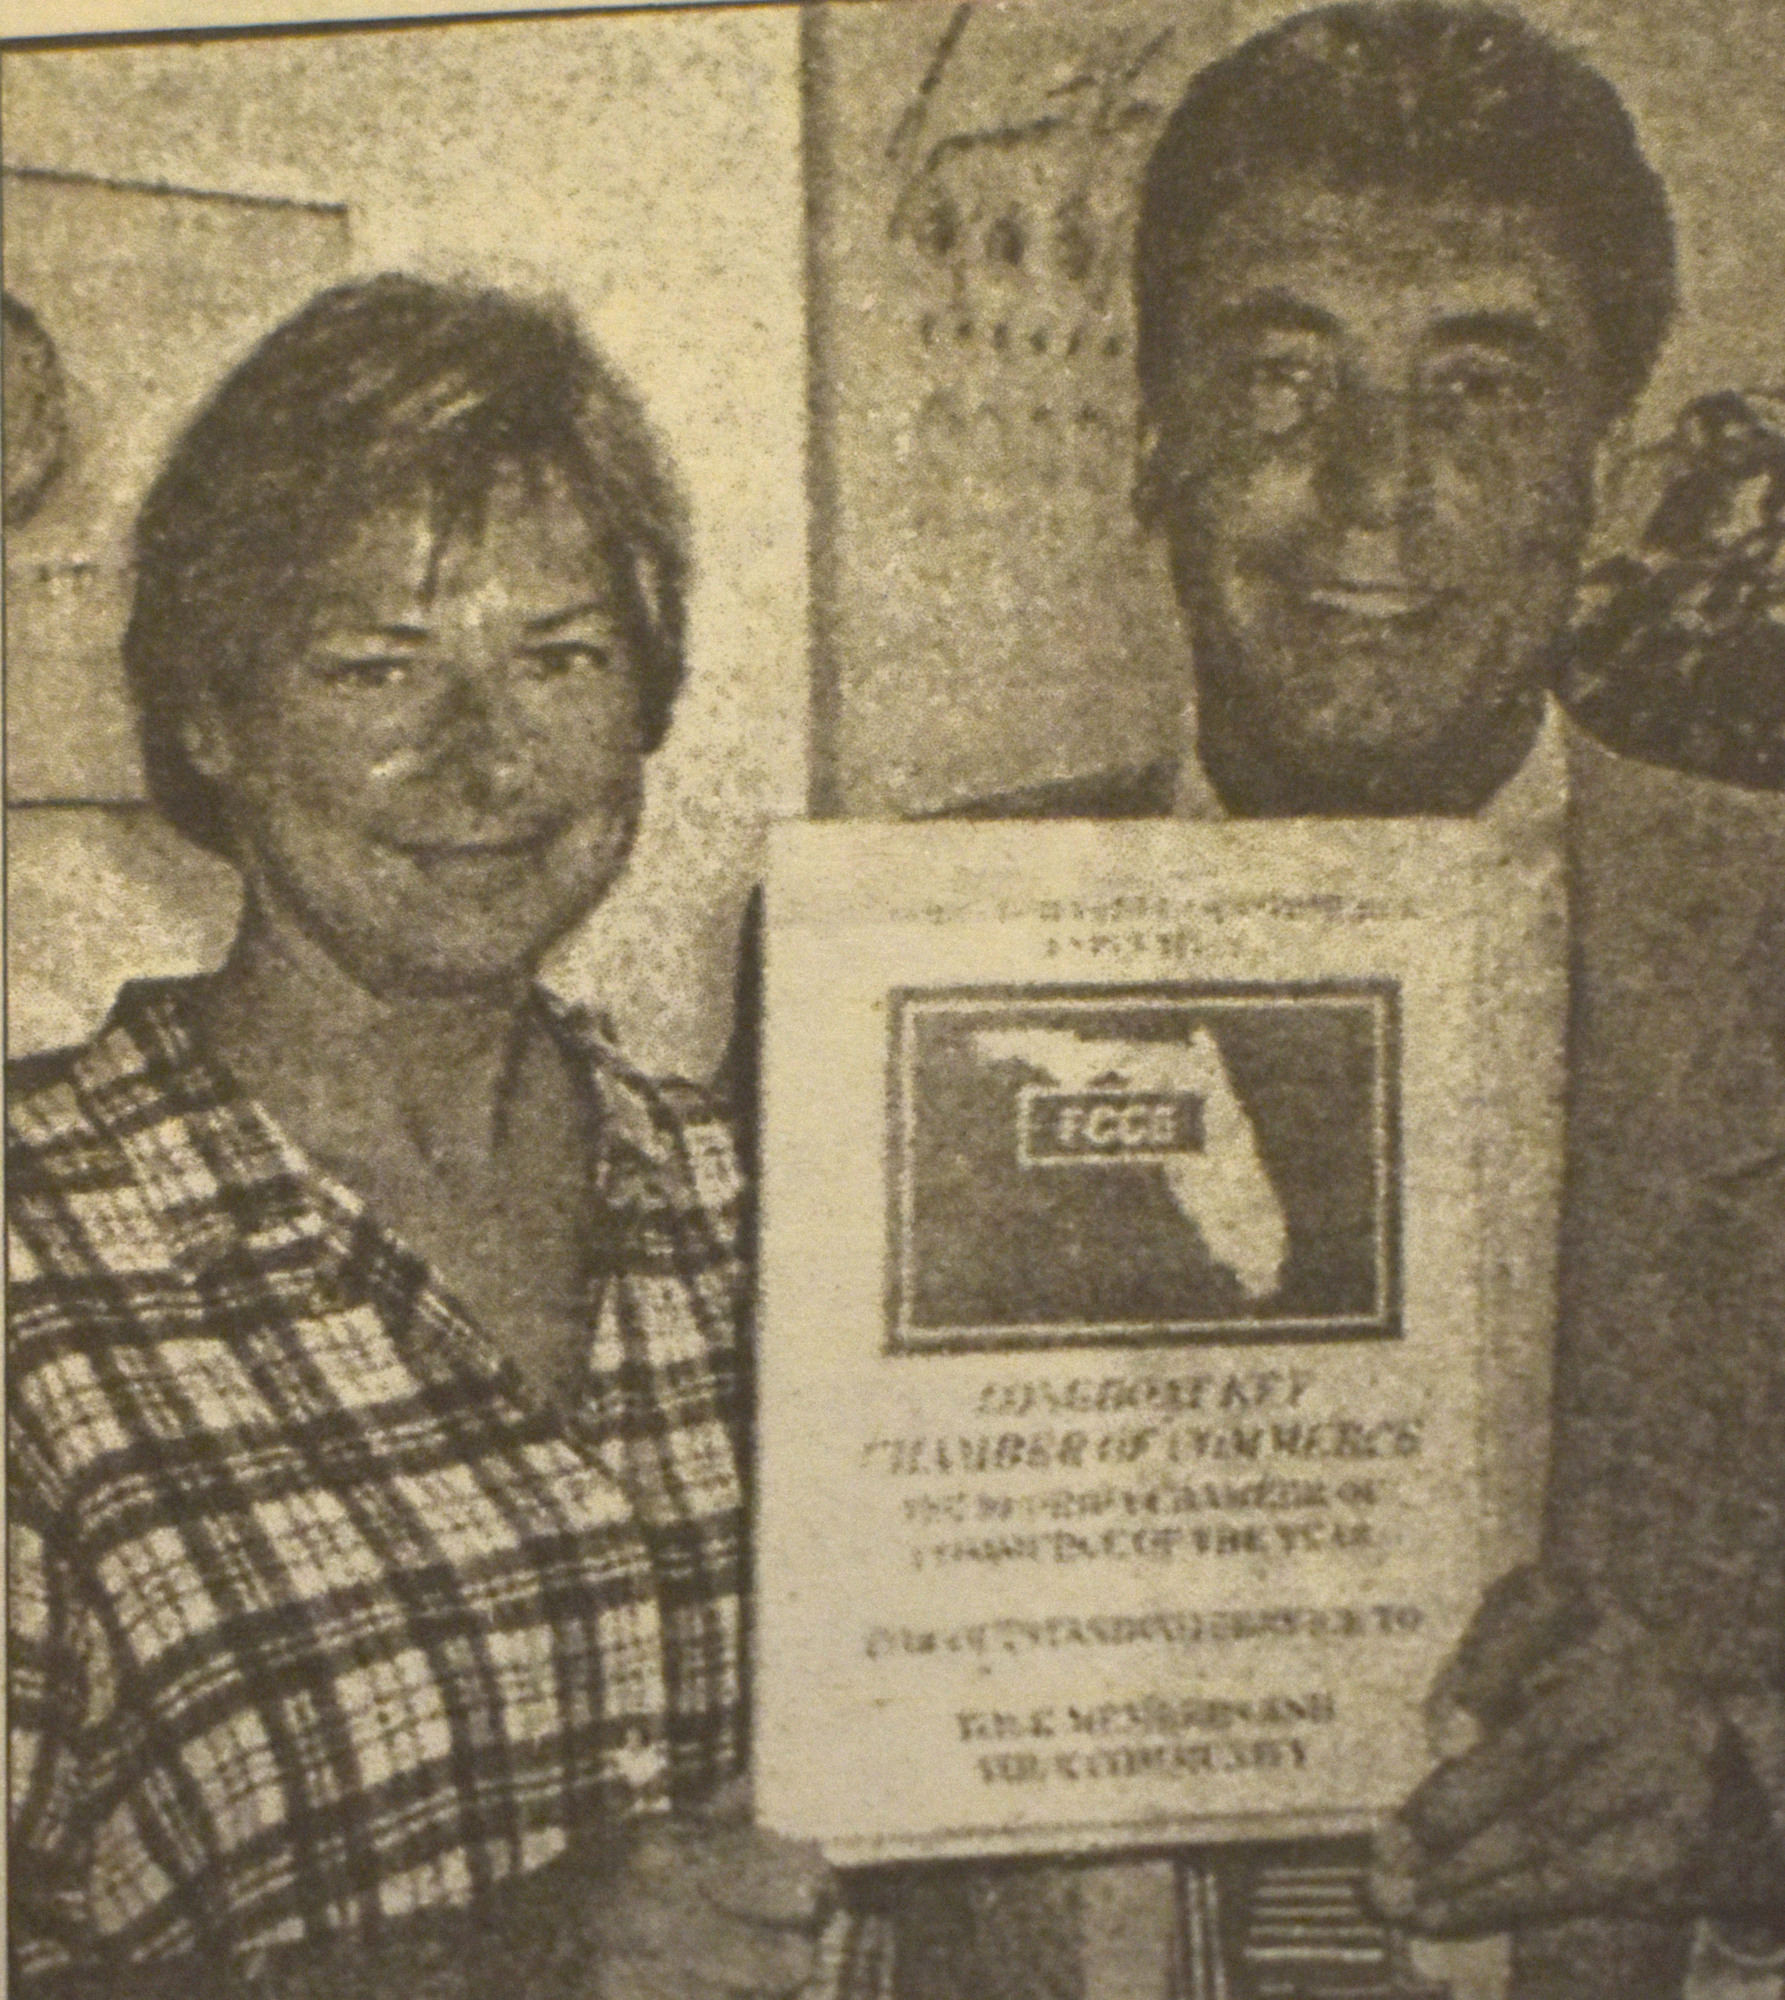 Chamber President Gail Loefgren and Andrew Vac pose with the award naming the Chamber the Best Small Chamber in Florida in 1997. File photo.